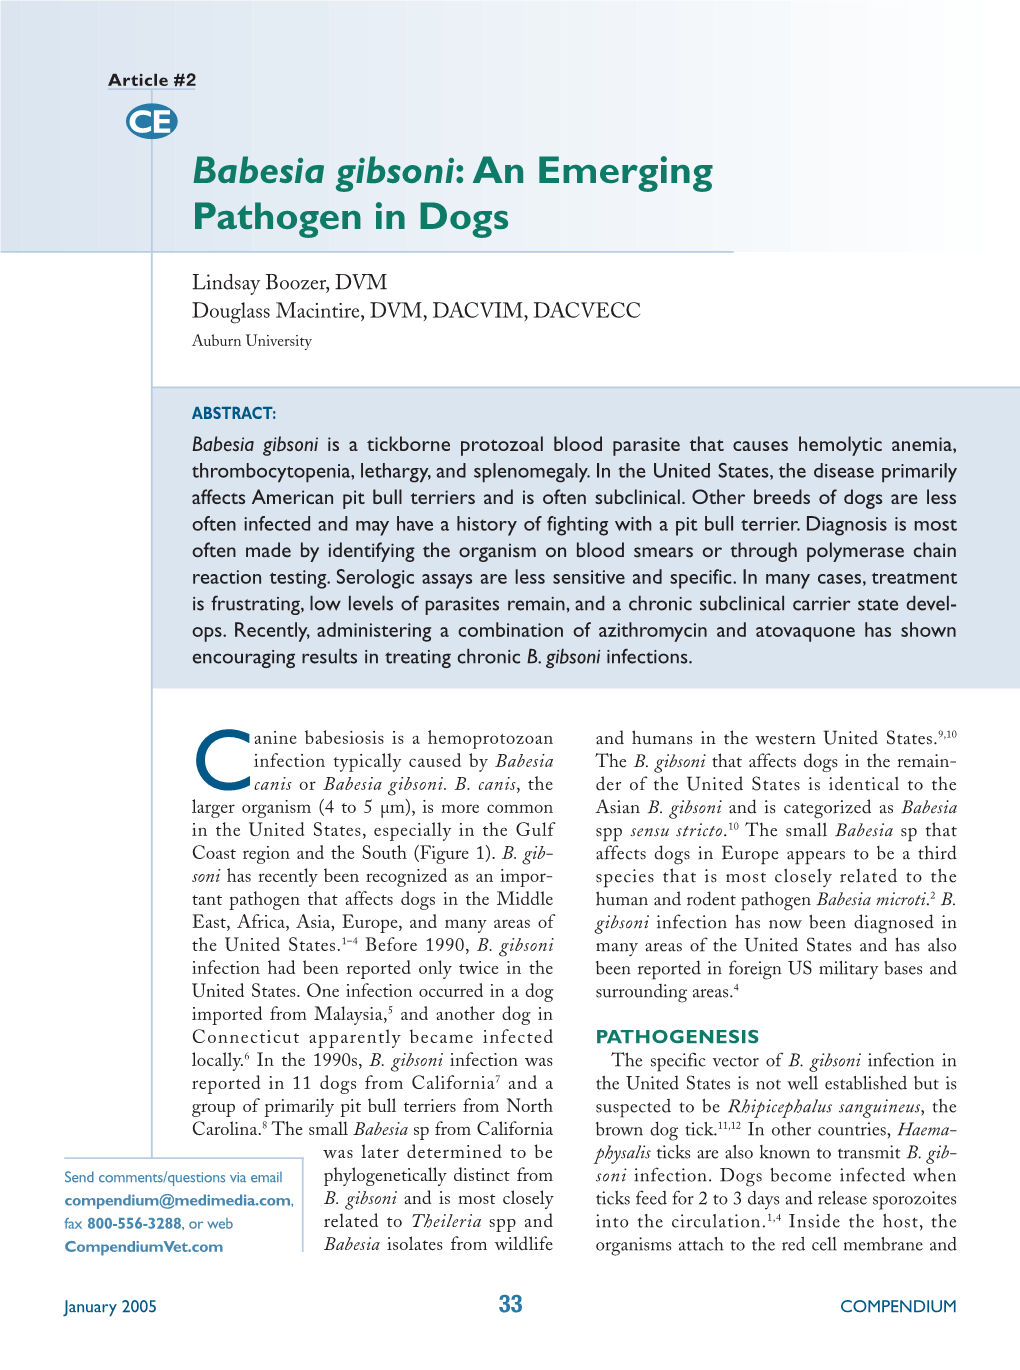 Babesia Gibsoni: an Emerging Pathogen in Dogs